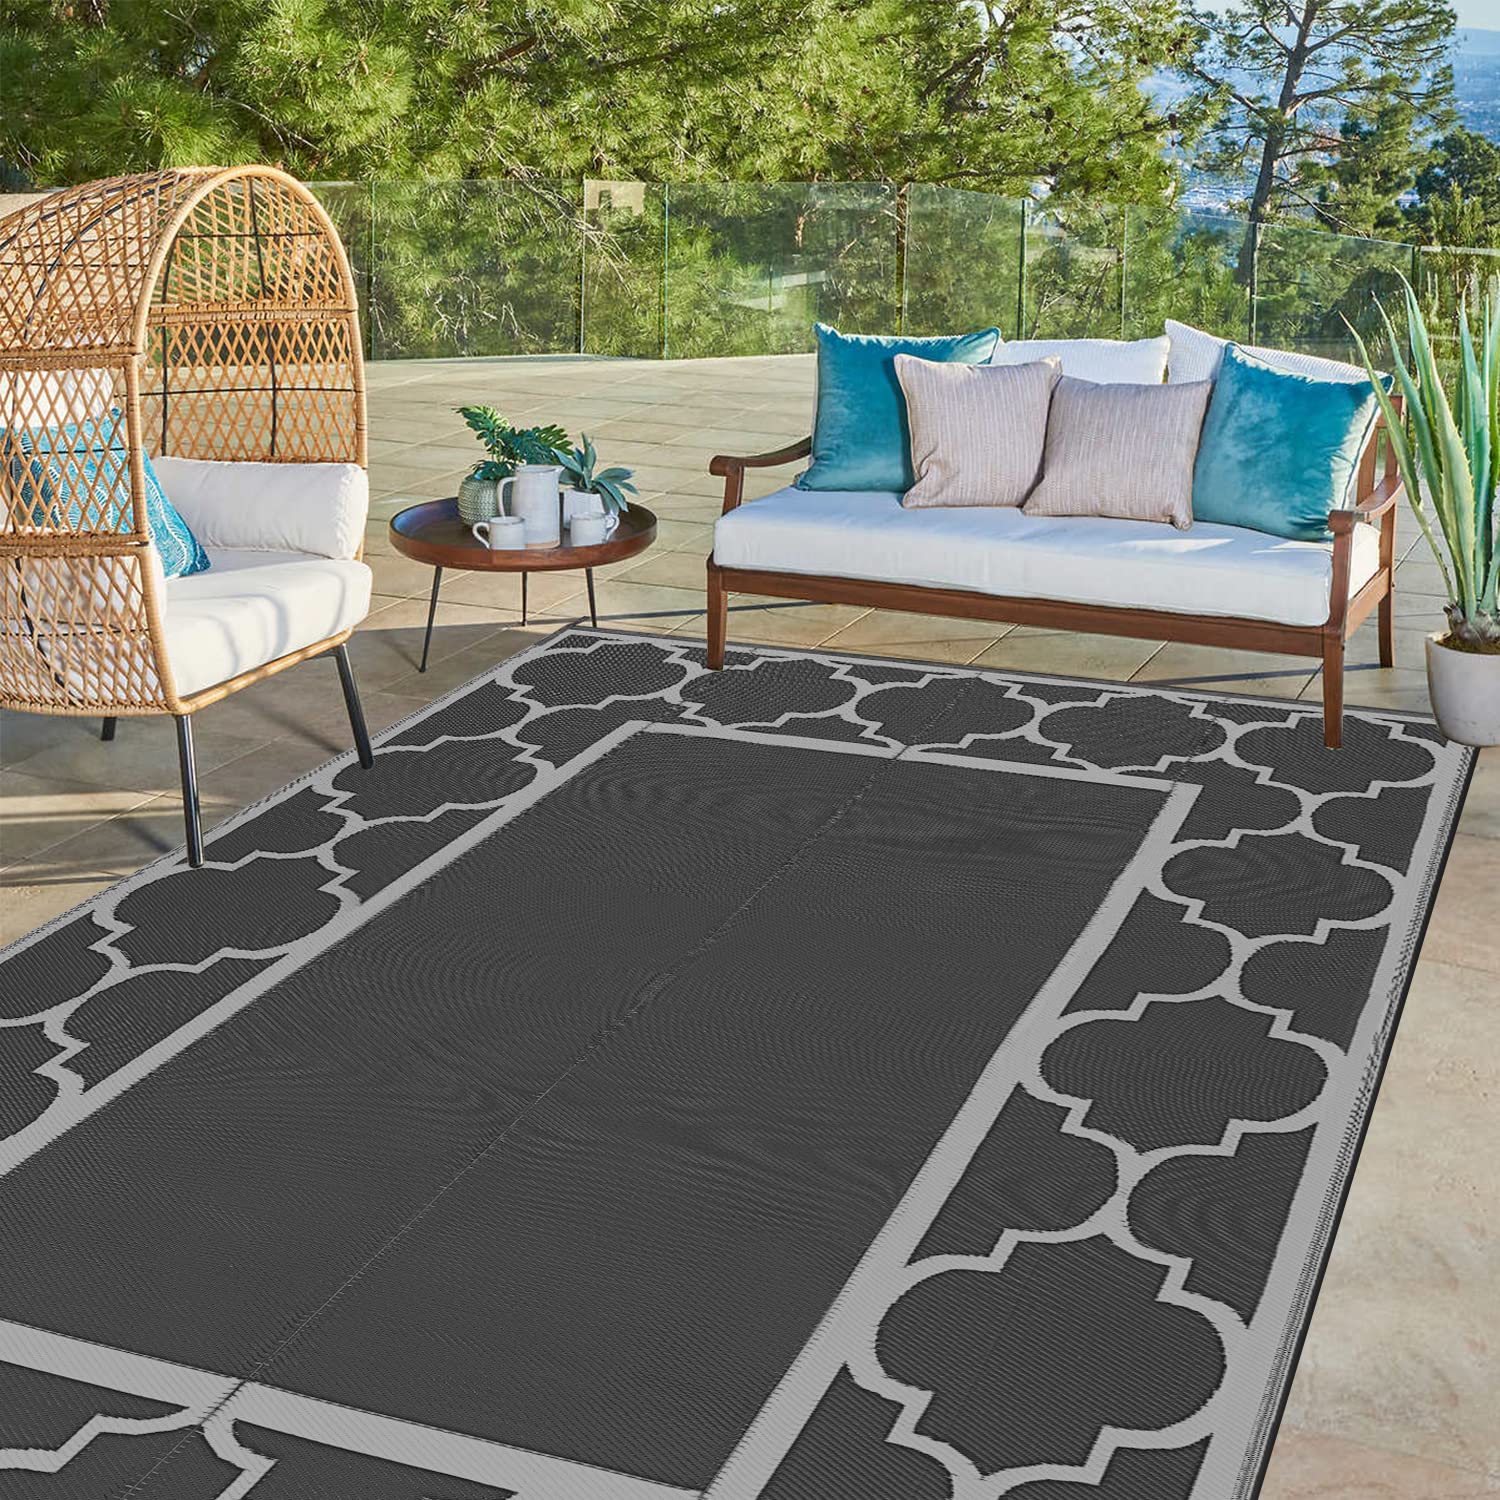 GENIMO Outdoor Rug for Patio Clearance,Reversible Straw Plastic